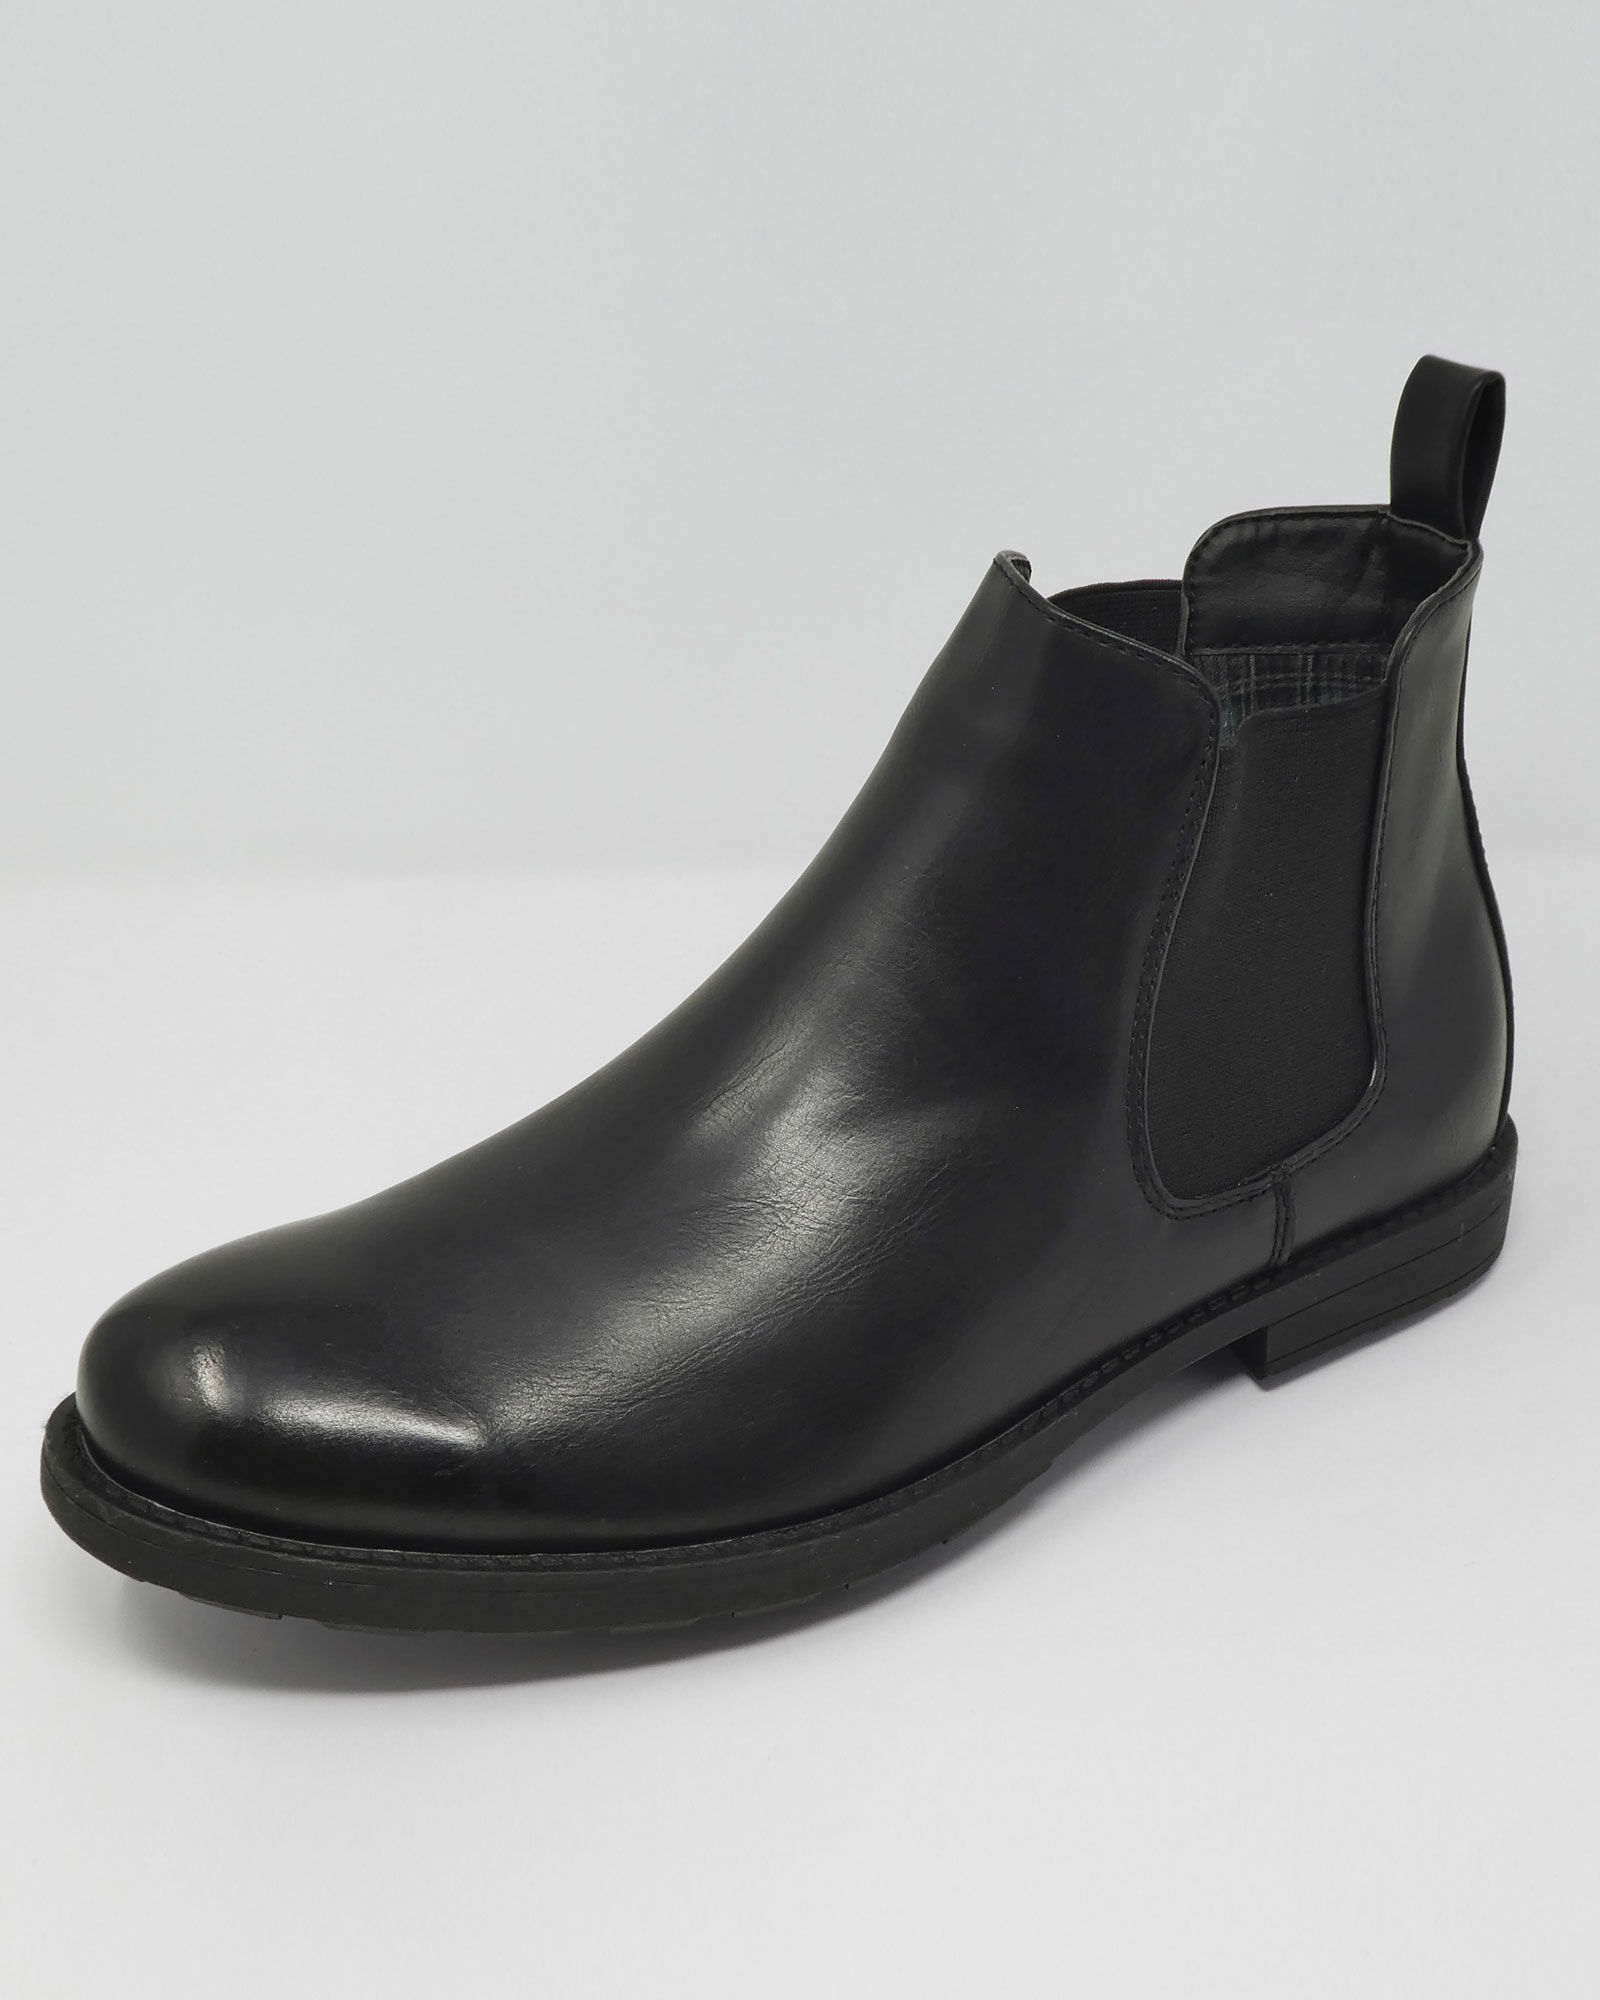 cotton traders mens boots